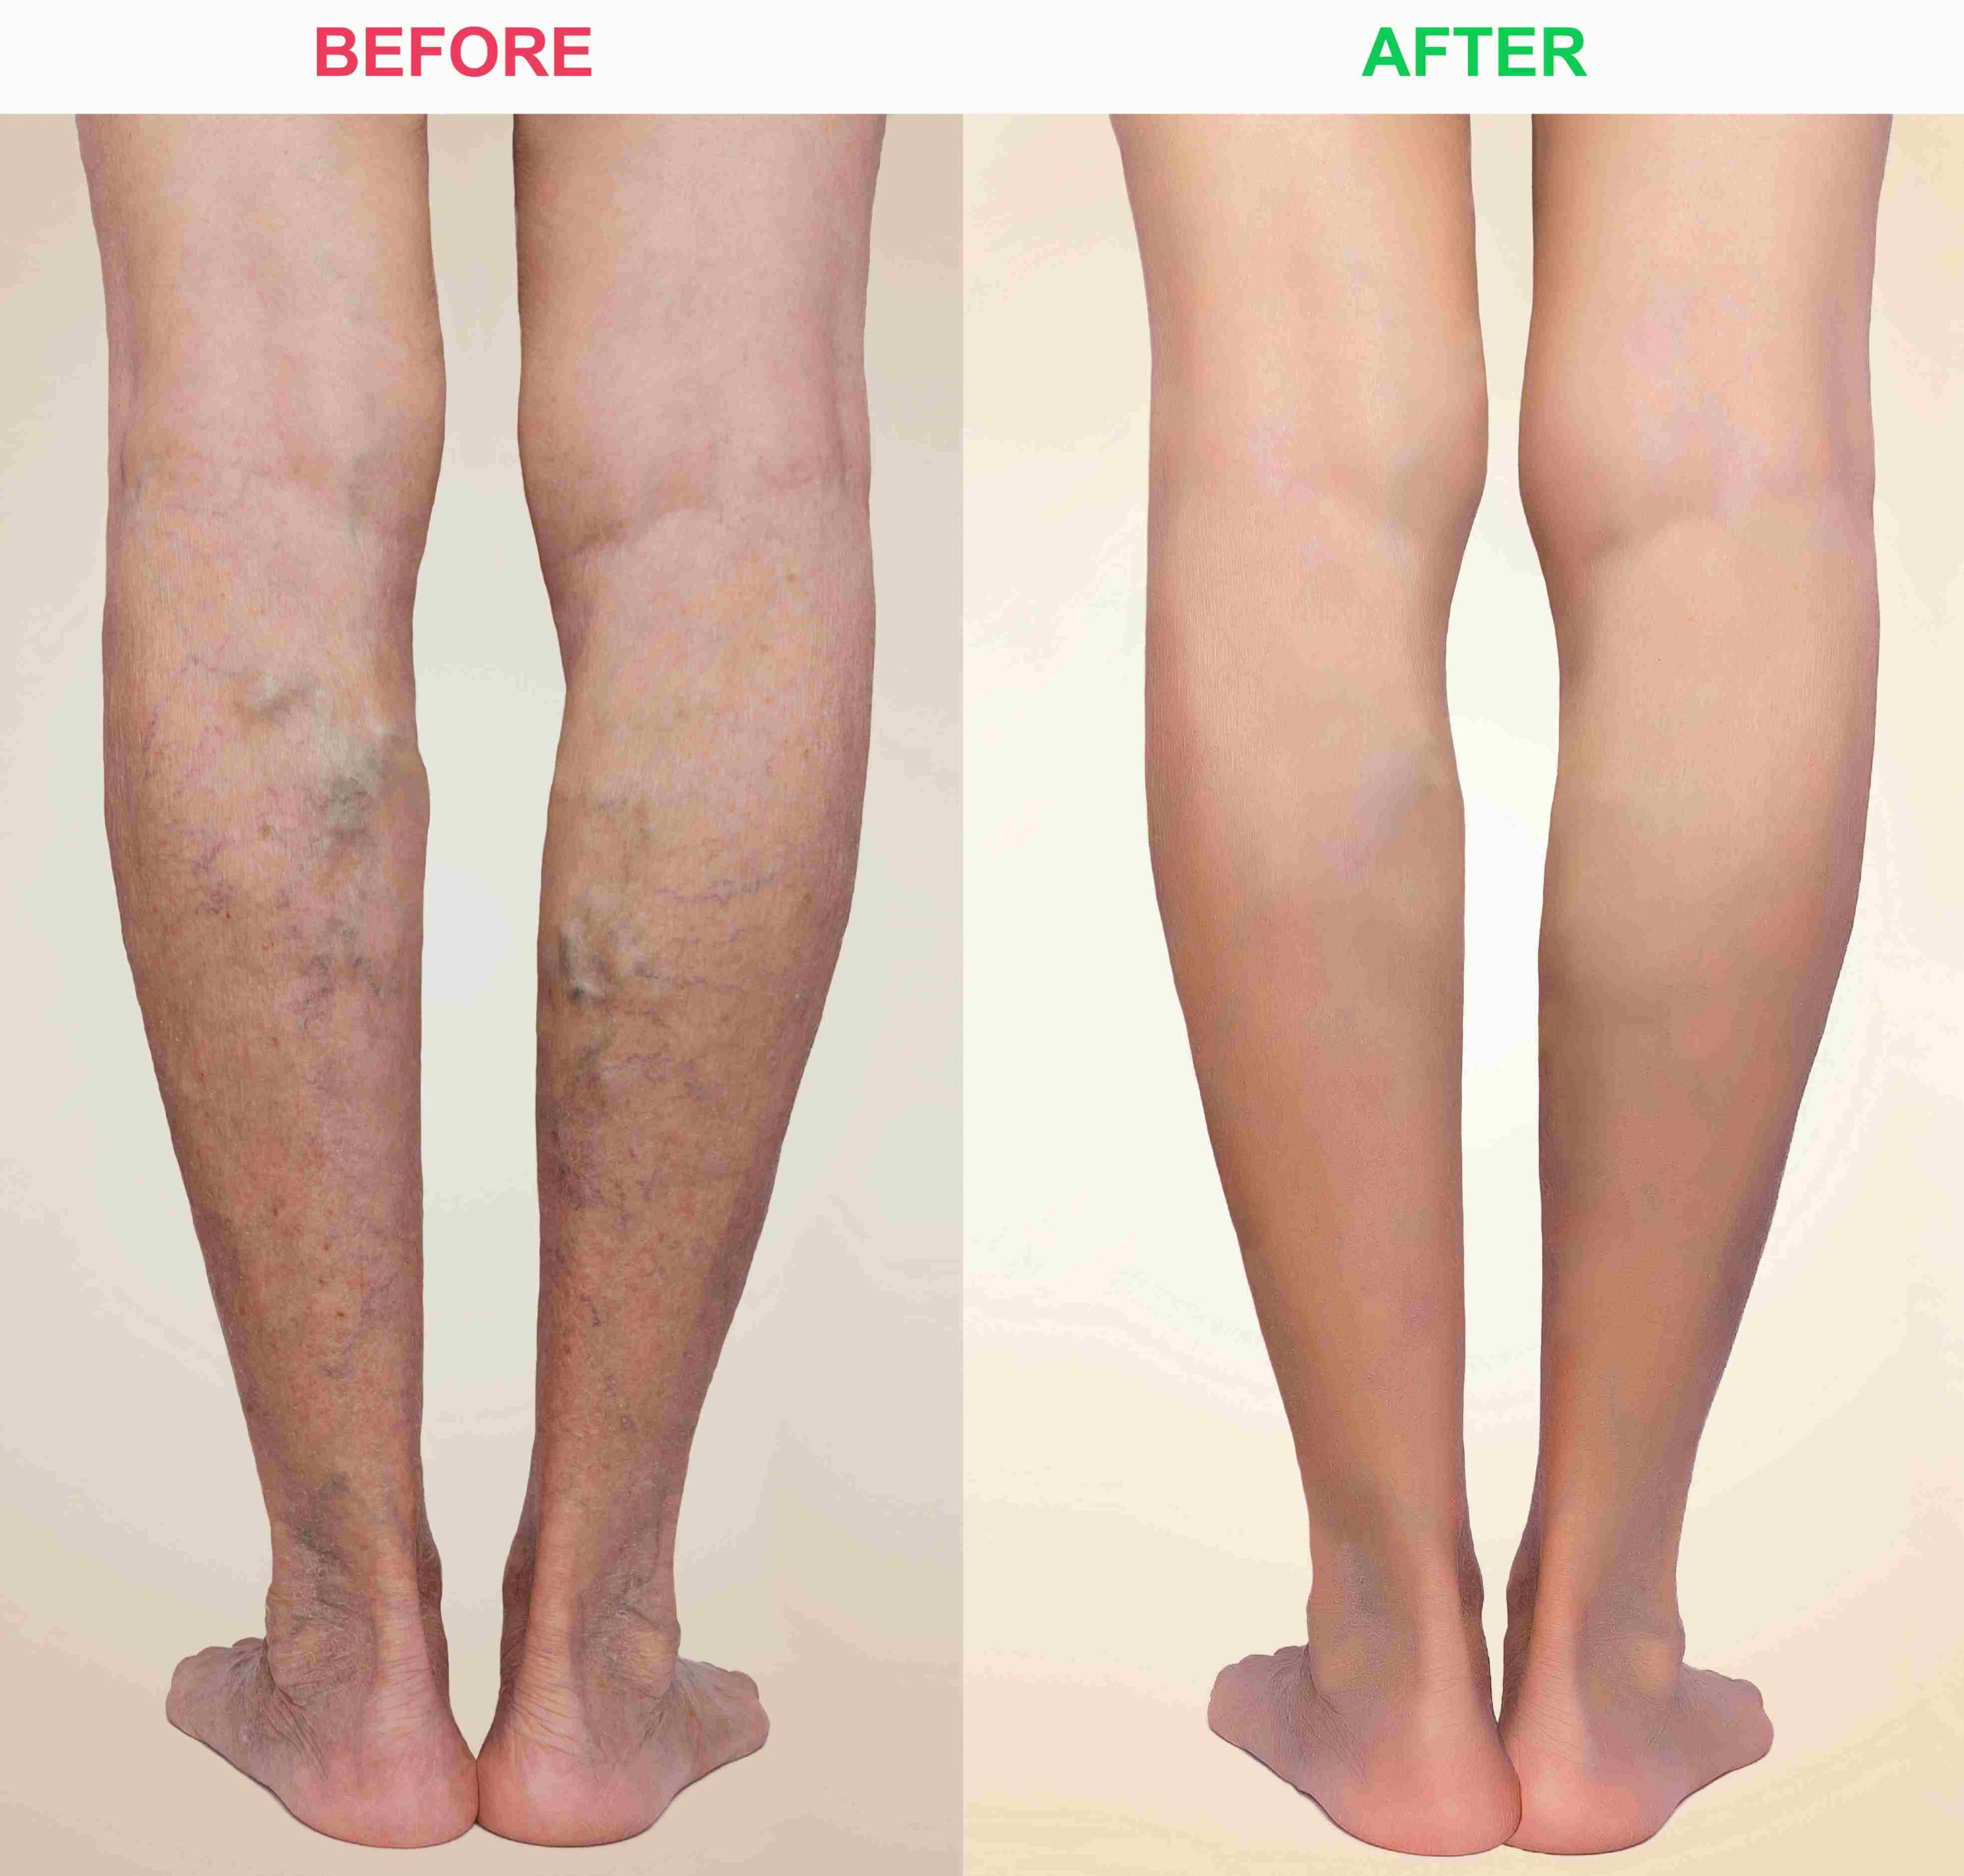 Laser Vein Removal Before and After Photos | Avail Aesthetics in Cary, NC